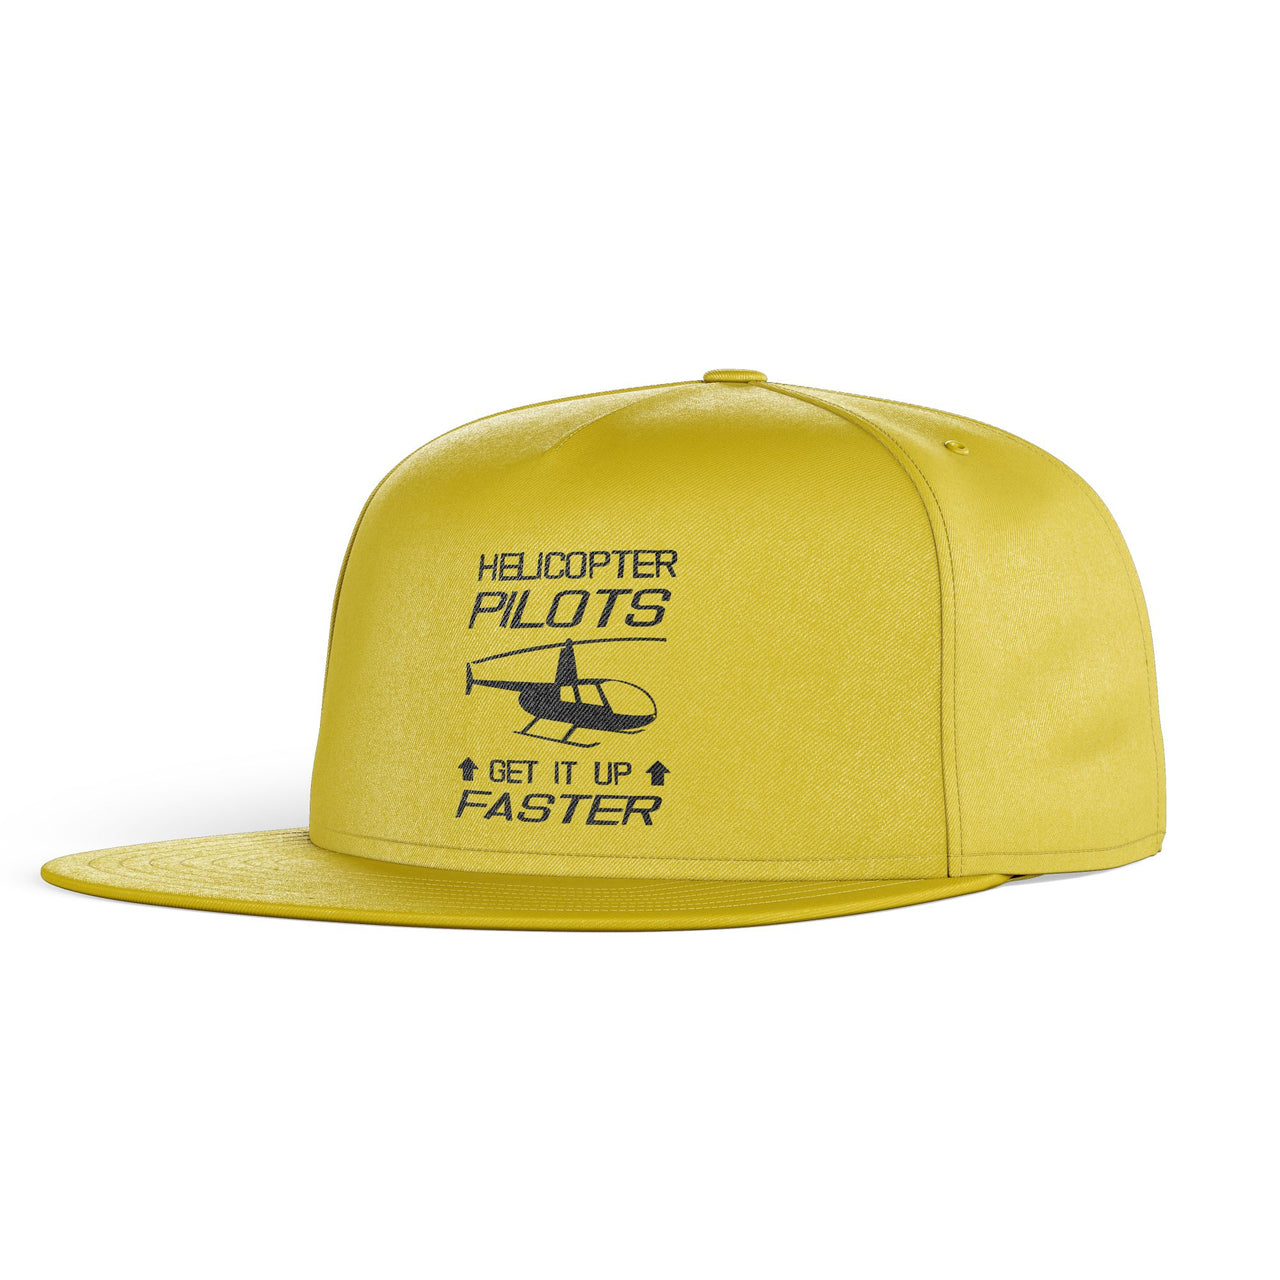 Helicopter Pilots Get It Up Faster Designed Snapback Caps & Hats